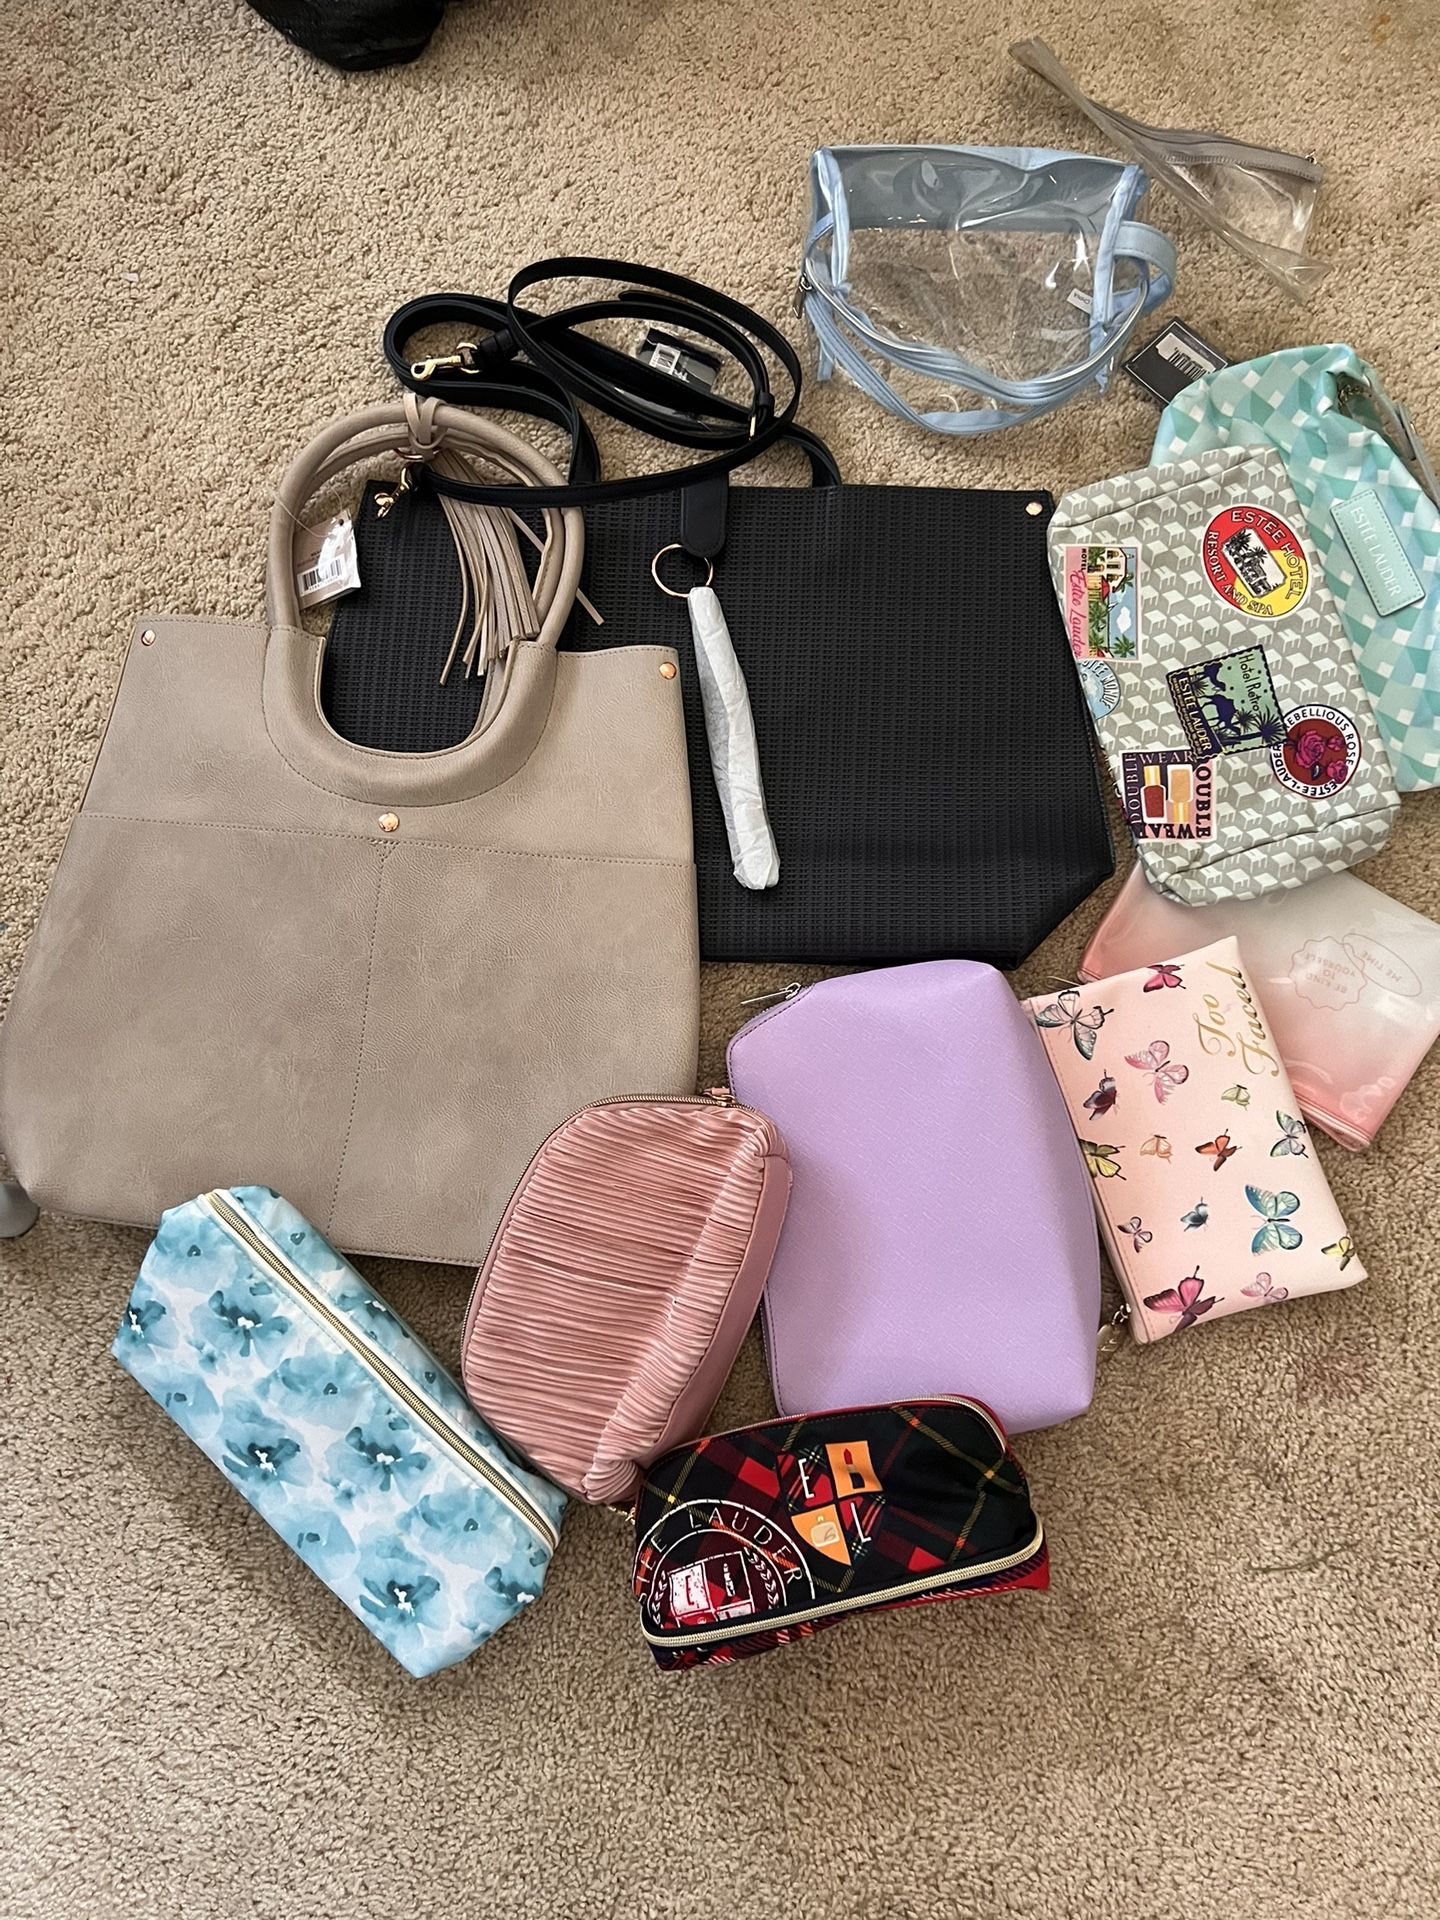 Purses And Makeup Bags 15 For All